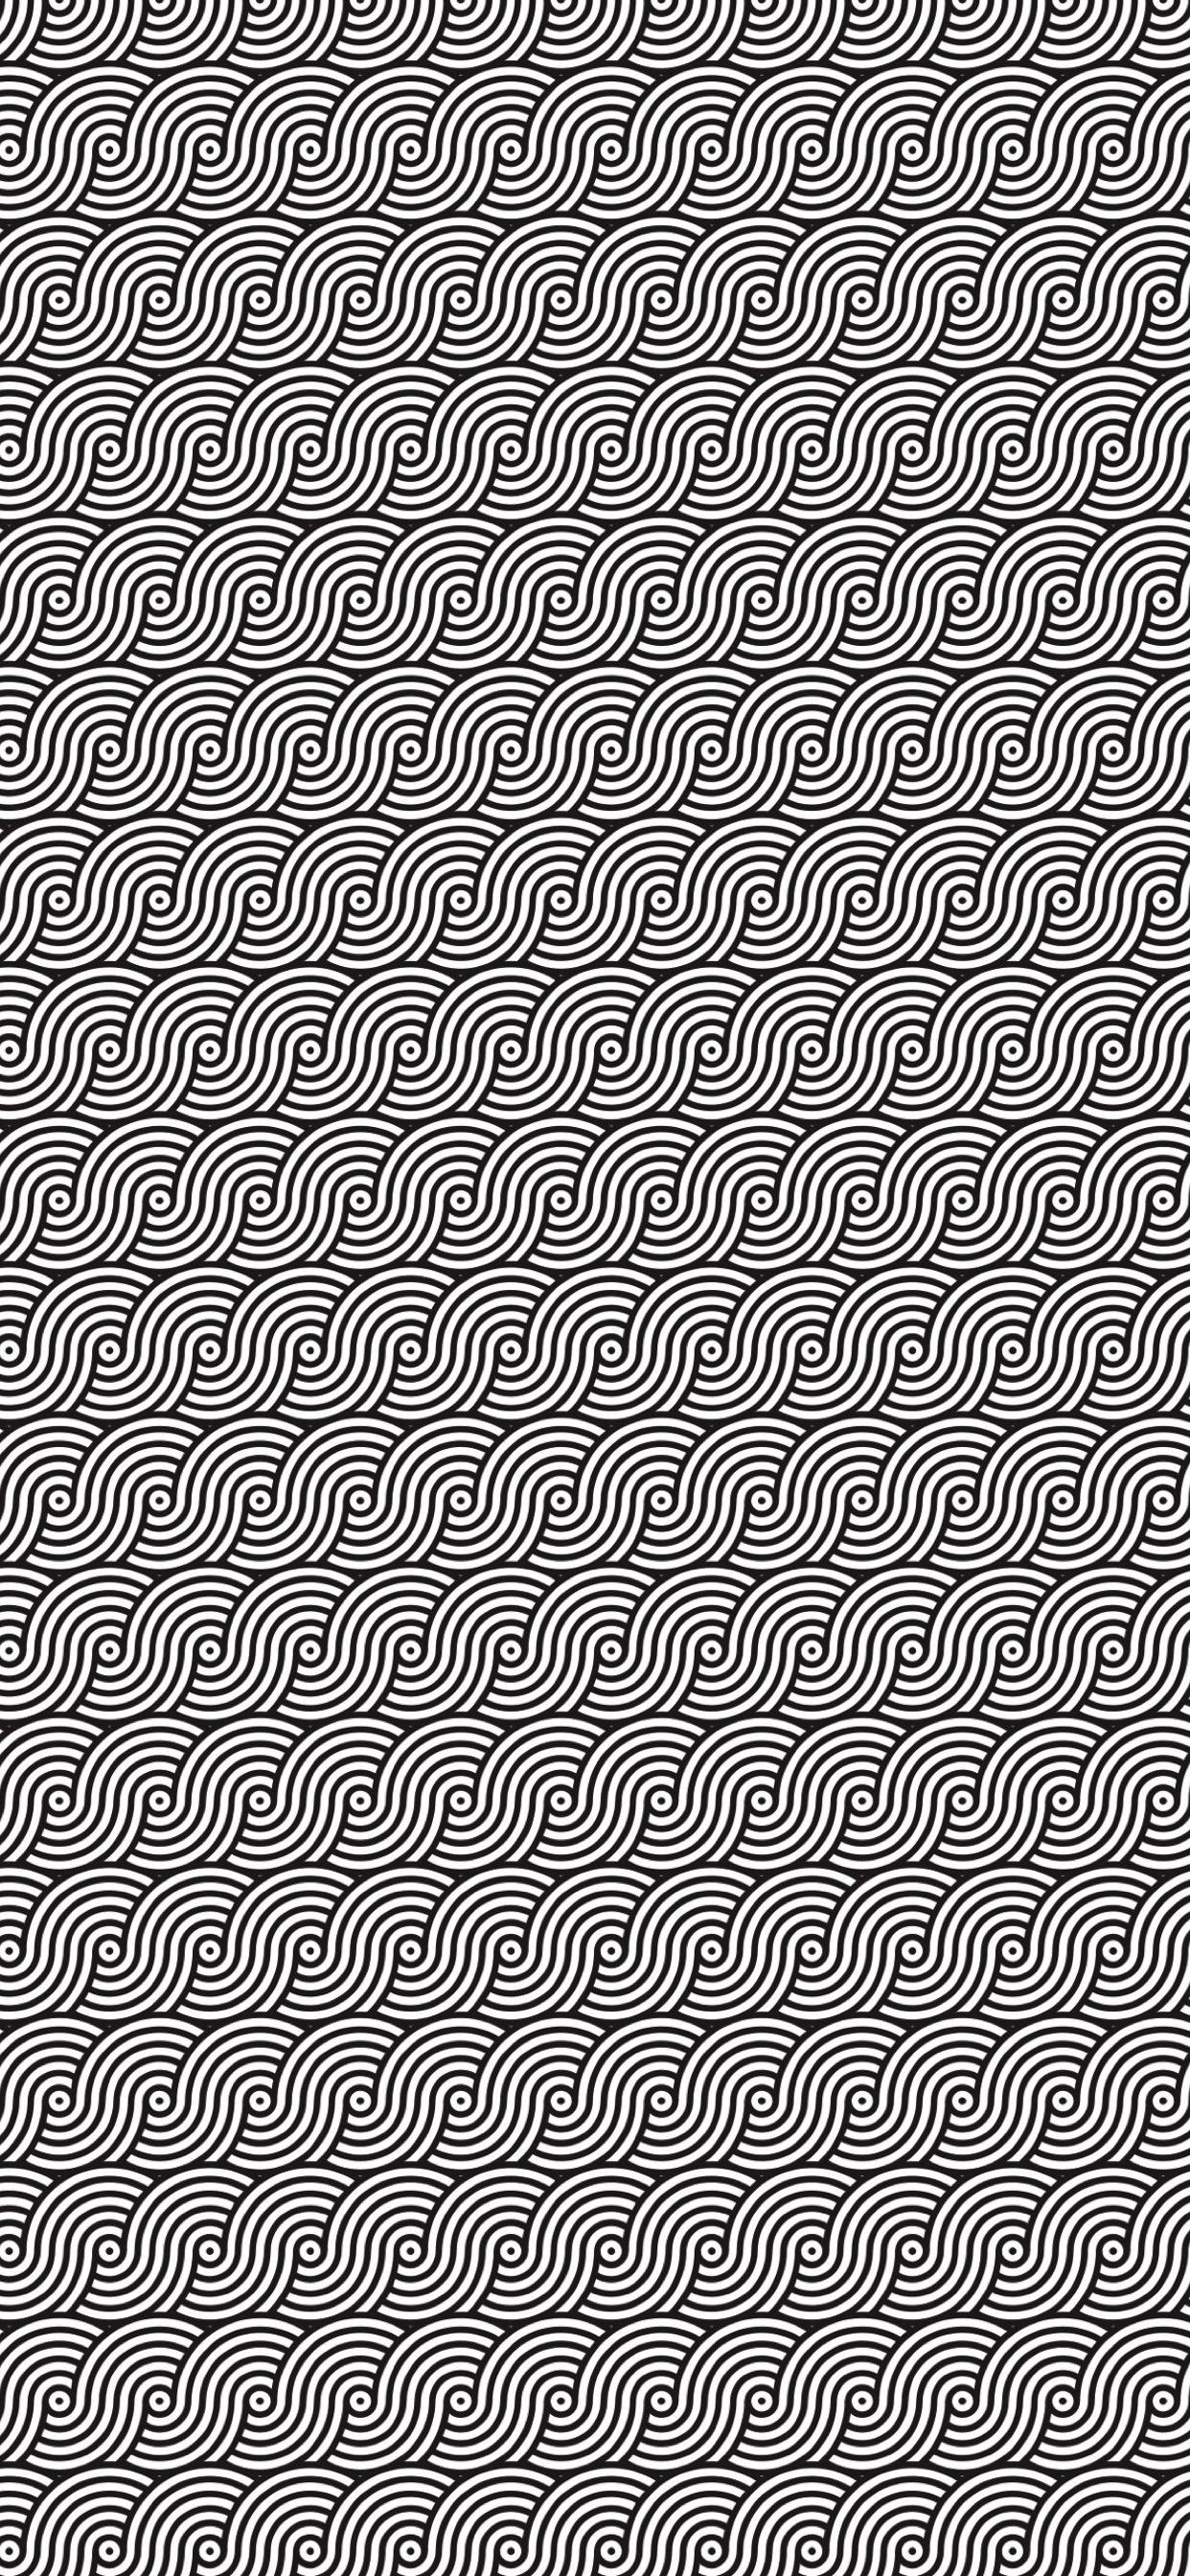 Pattern Round Wave Black And White Wallpapersc Iphone Xs Max